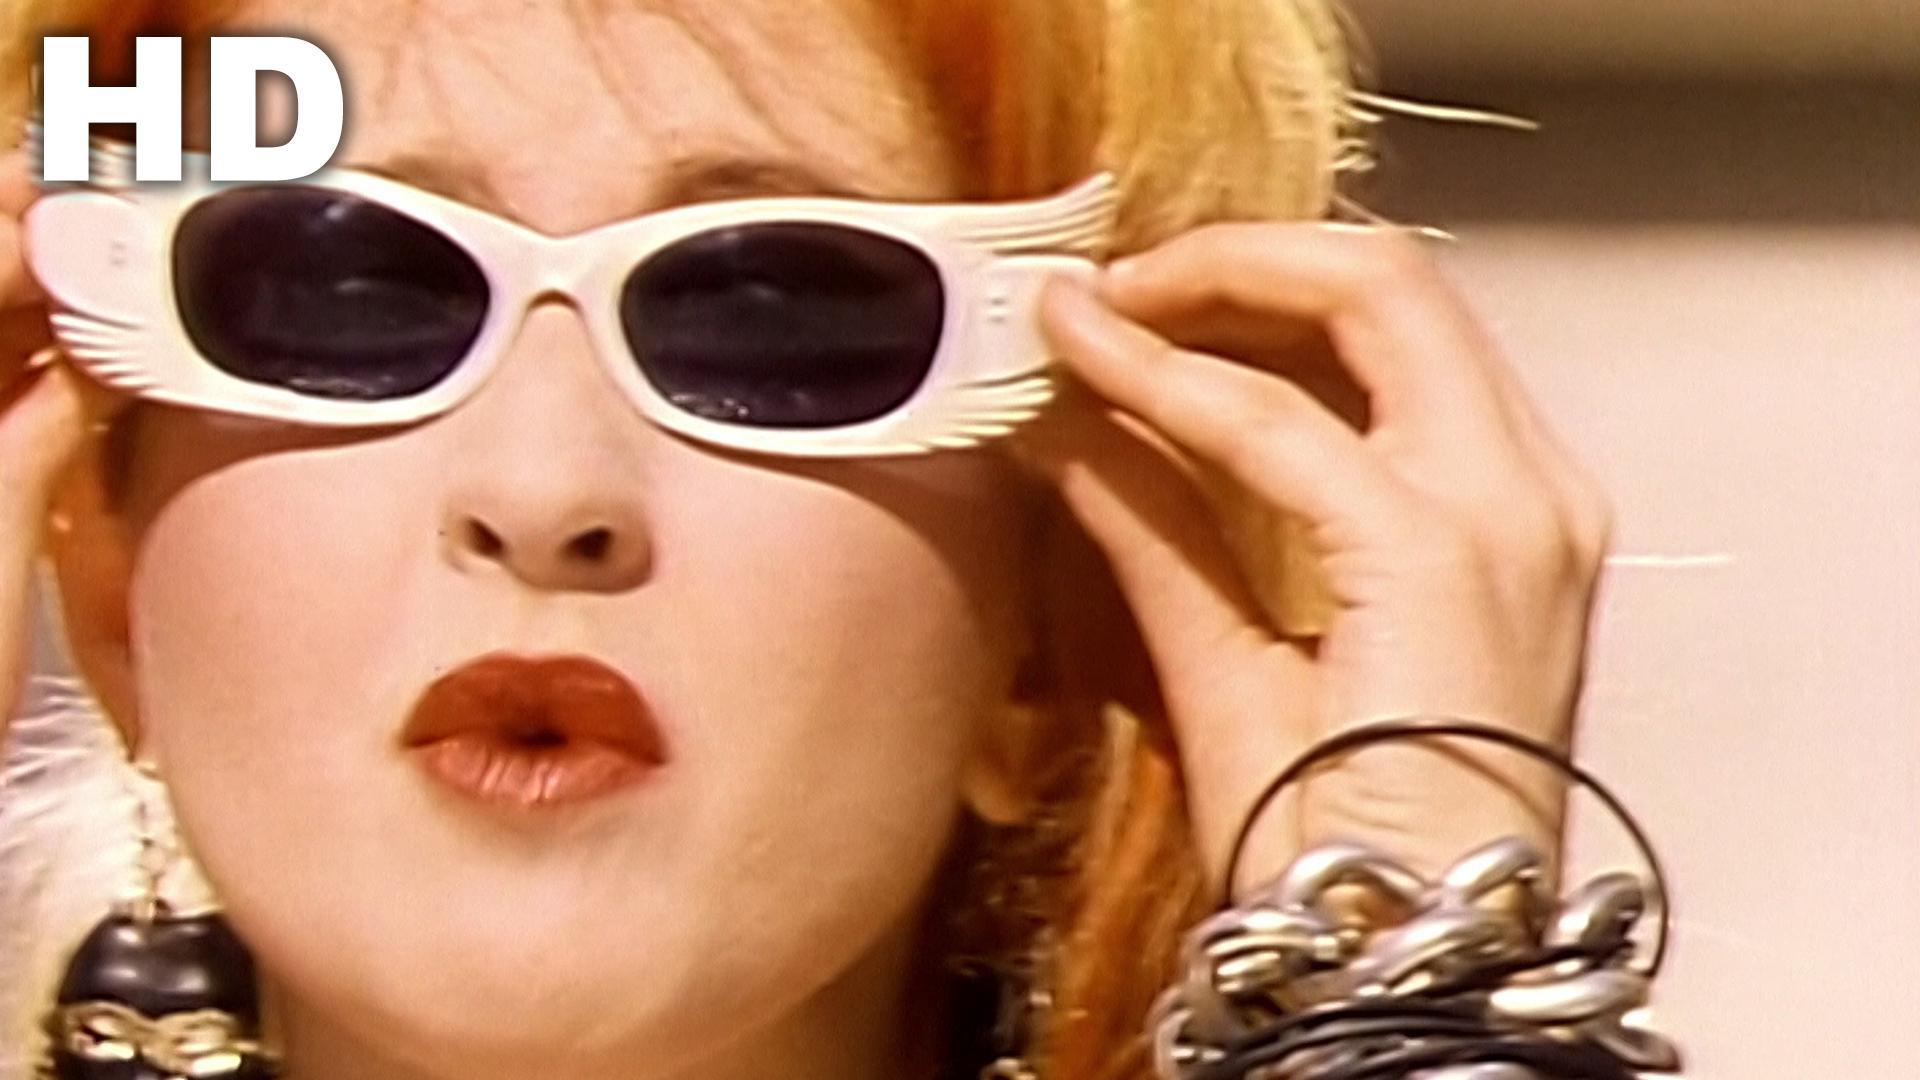 Cyndi Lauper - Girls Just Want To Have Fun (Official HD Video)